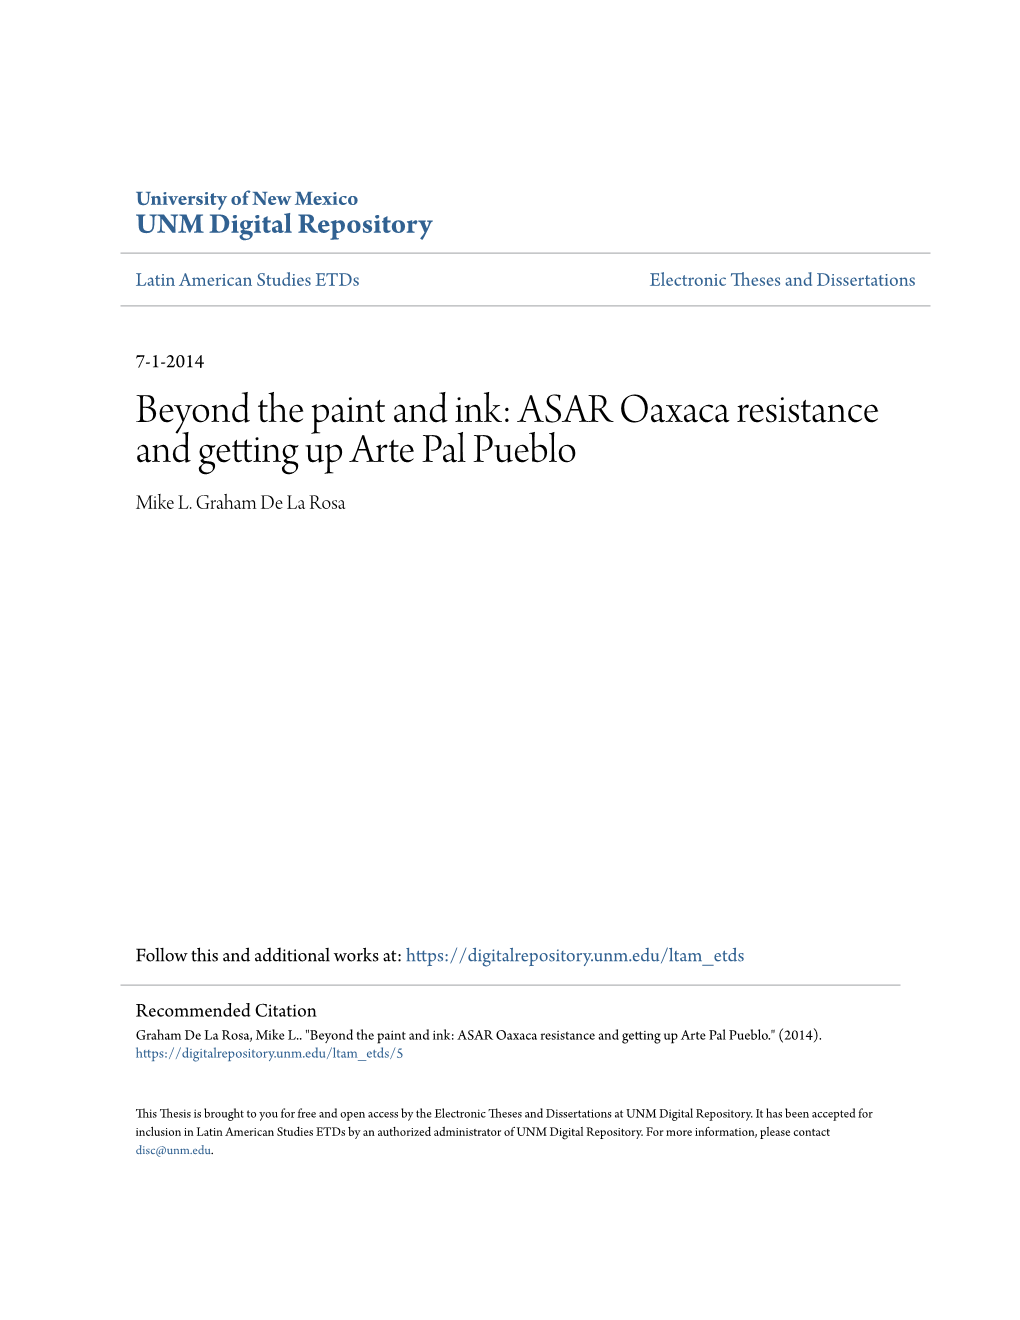 ASAR Oaxaca Resistance and Getting up Arte Pal Pueblo Mike L